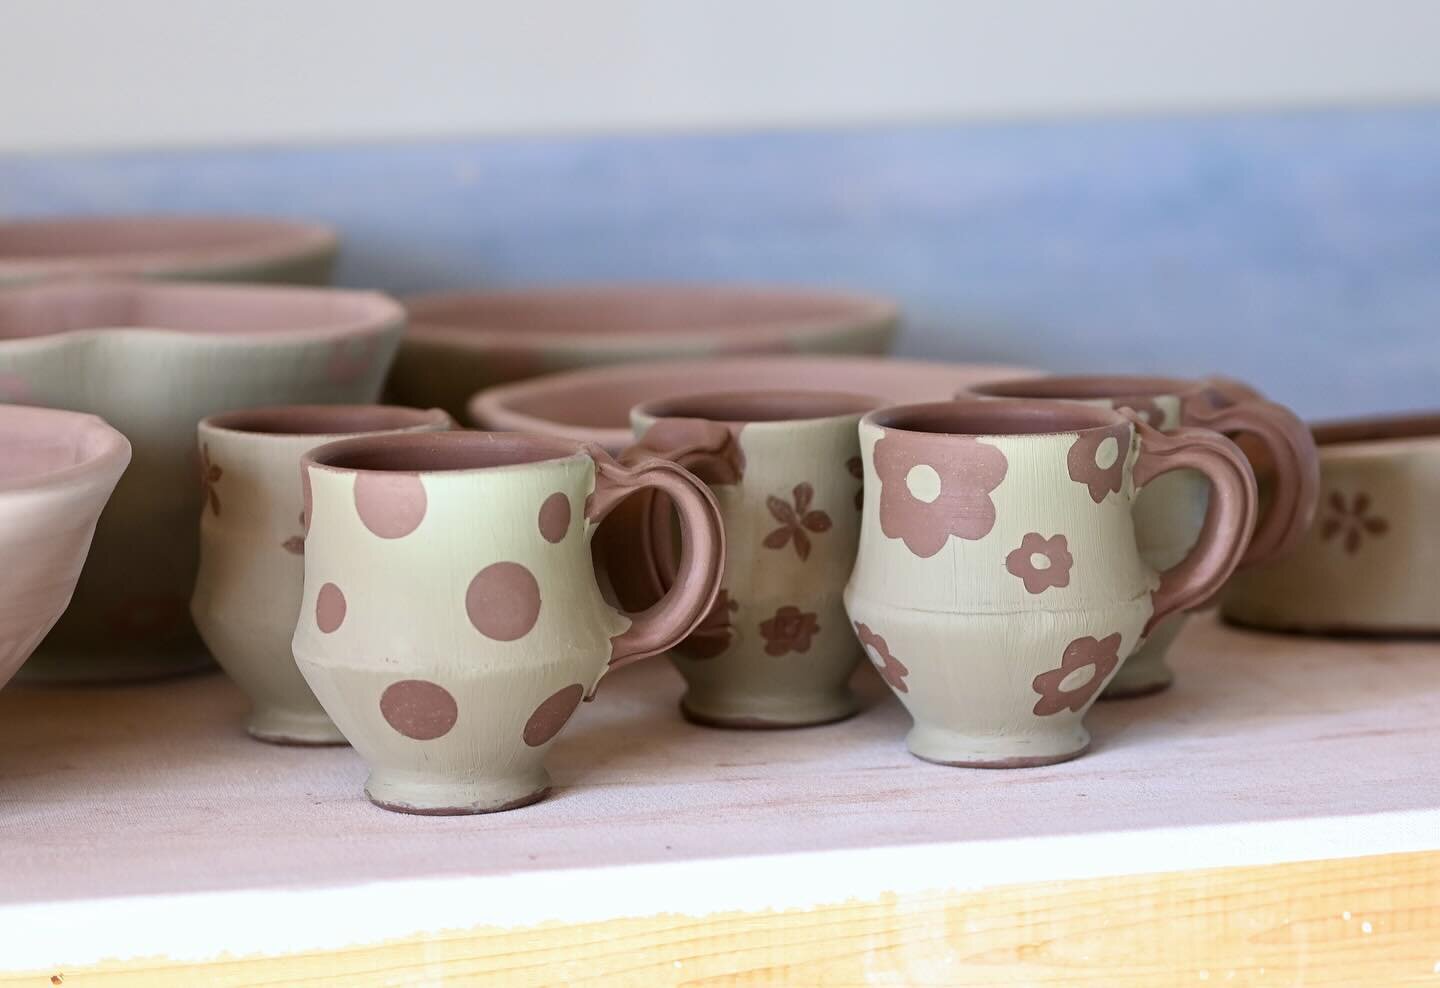 After I put the handles on the mugs, I let them dry a little bit and apply the slip. It looks a lot different now than it will look once it&rsquo;s glazed. Check out the last photo for what it can look like.
The asparagus trays in the second photo ha